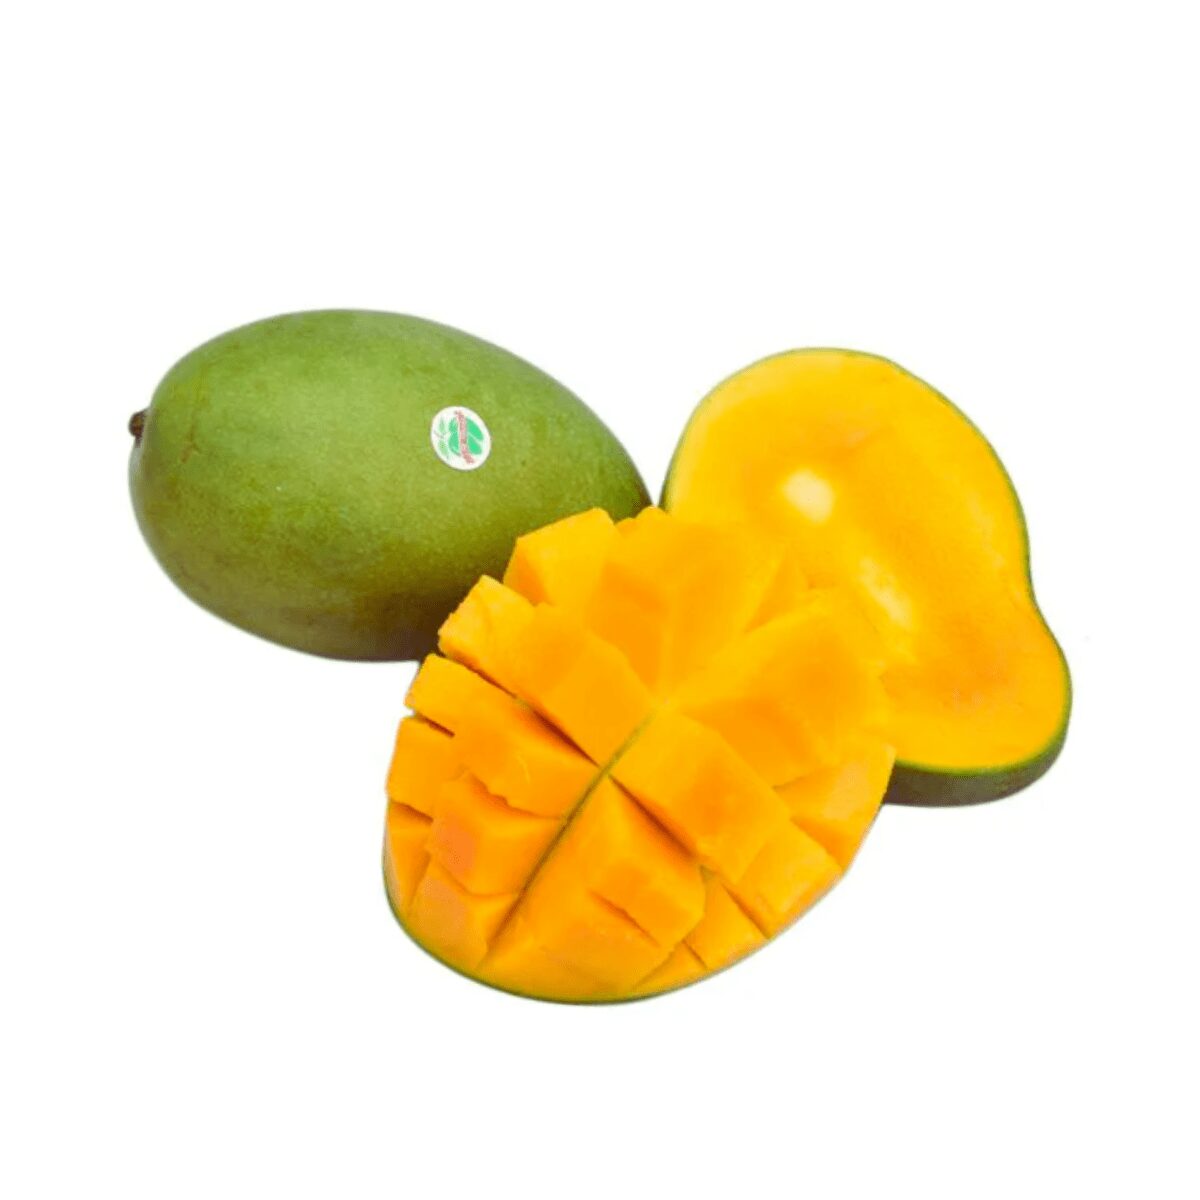 Buy Fresh And Juicy Lily Avocado Mango - Fruits Express Delivery